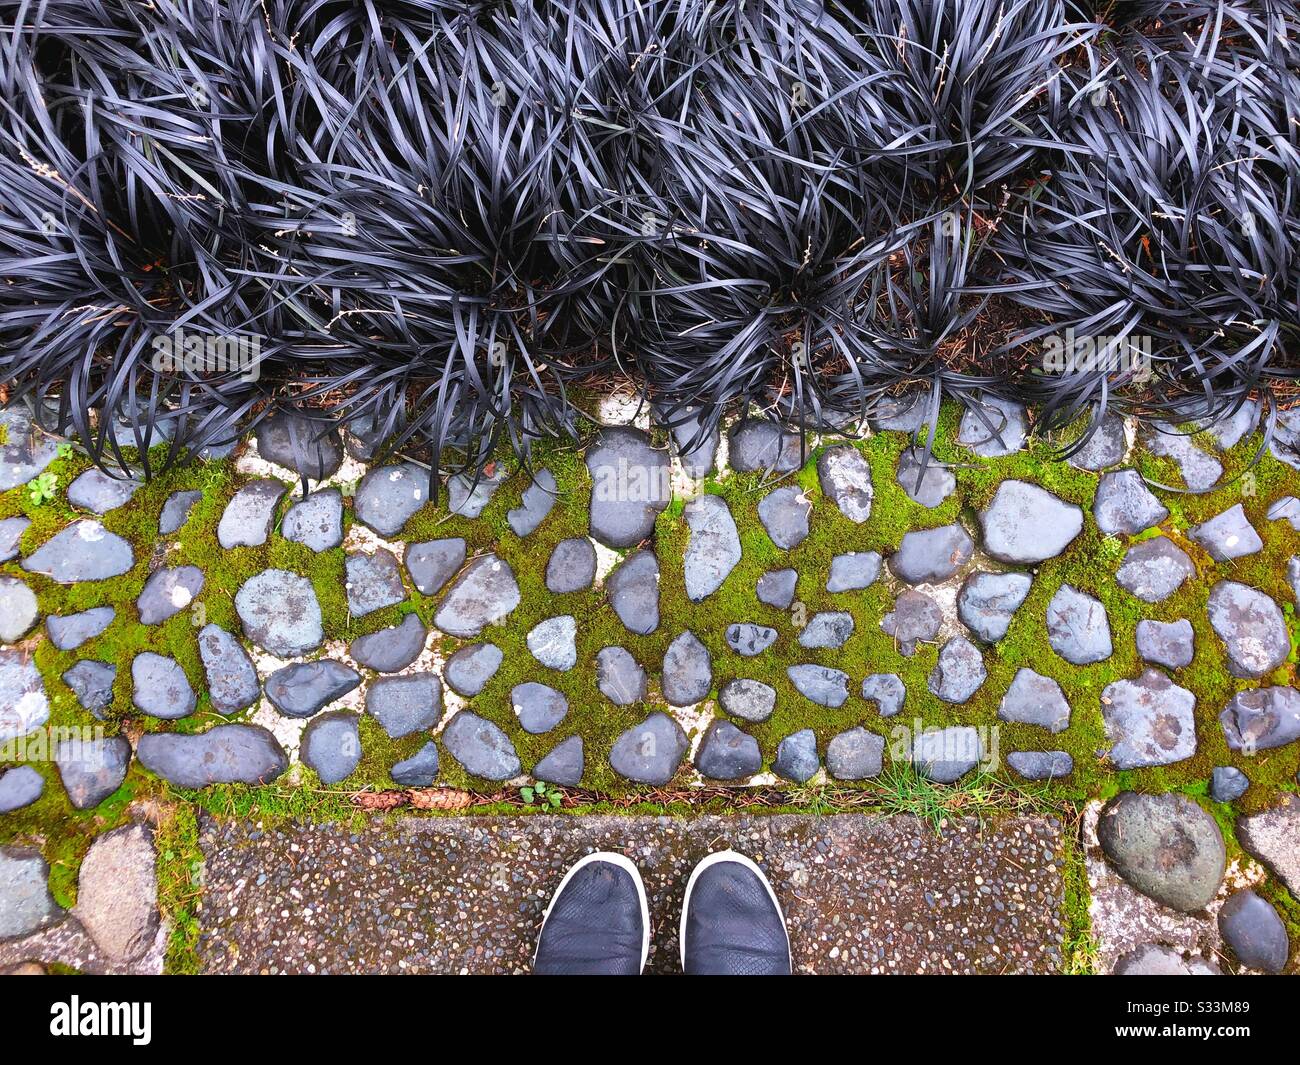 Black grass and moss on a stone walkway. Stock Photo